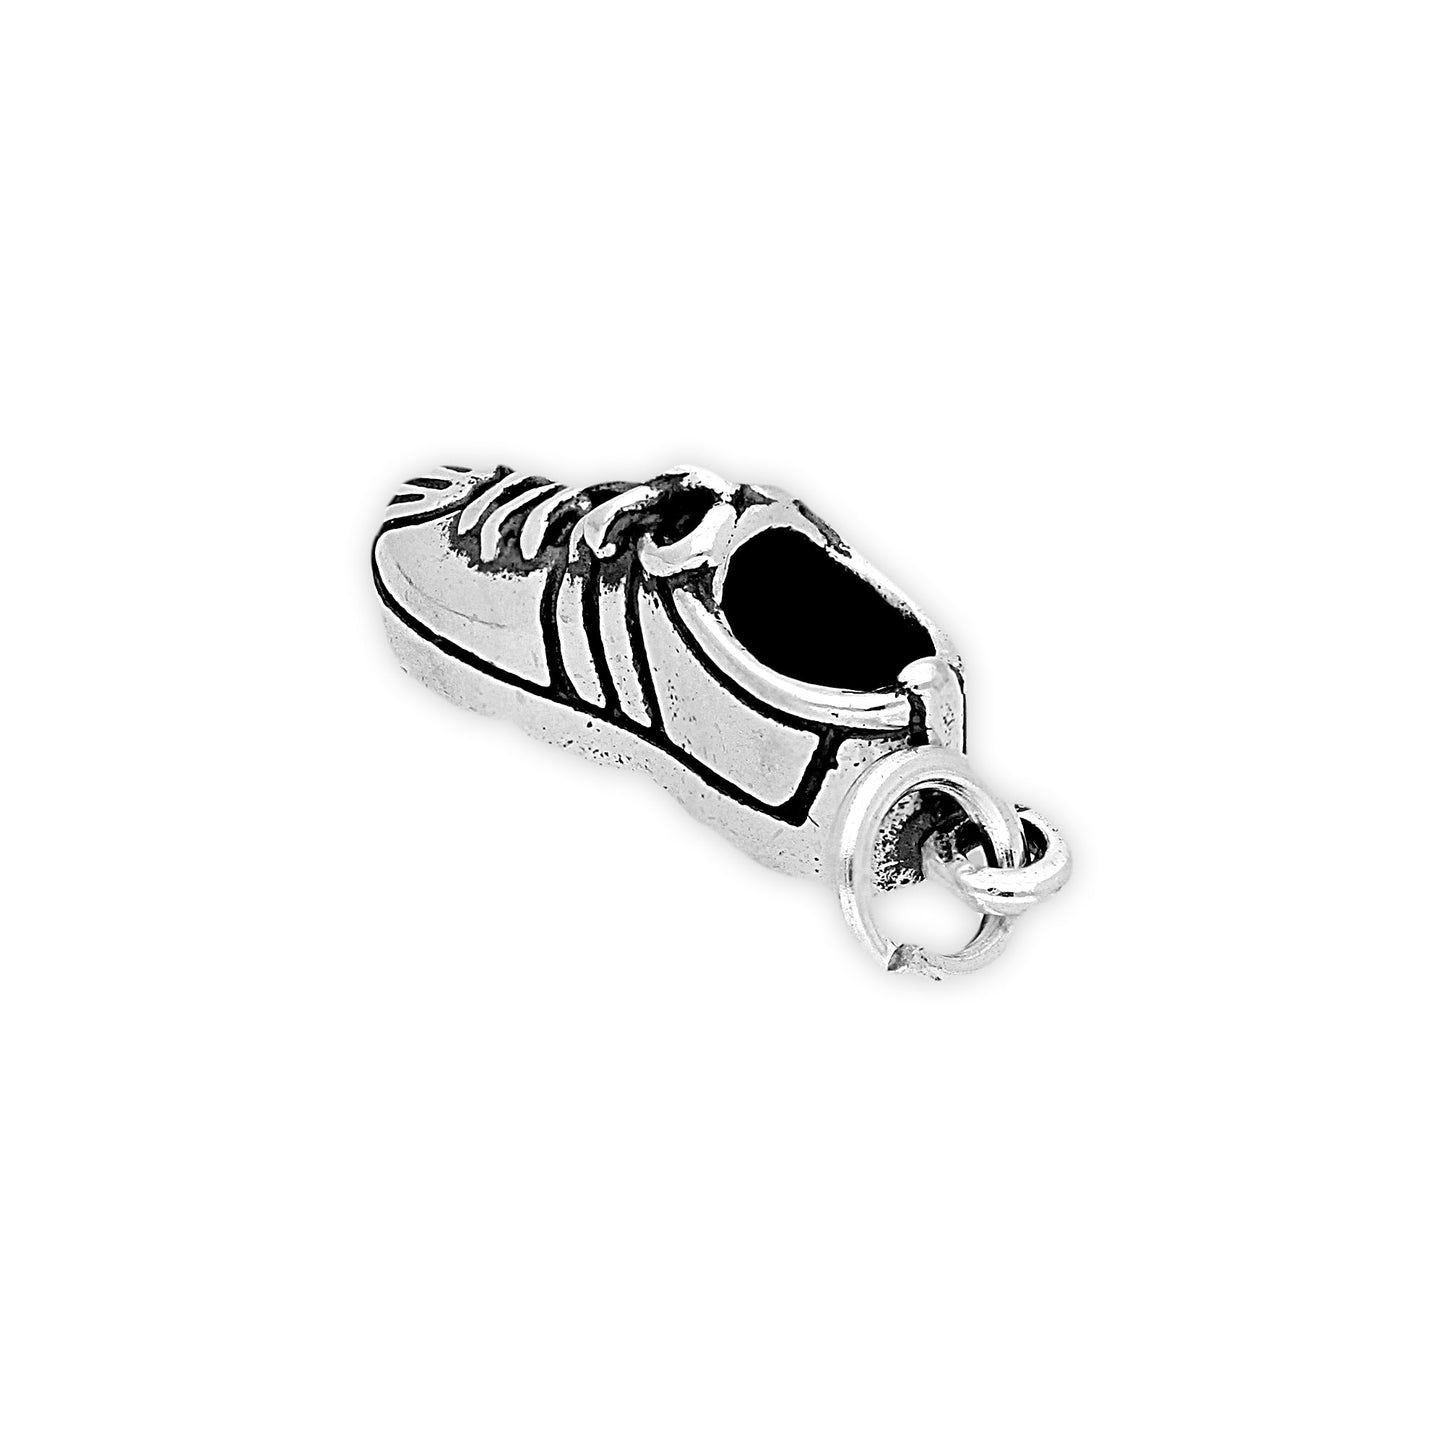 Sterling Silver Running Shoe Charm